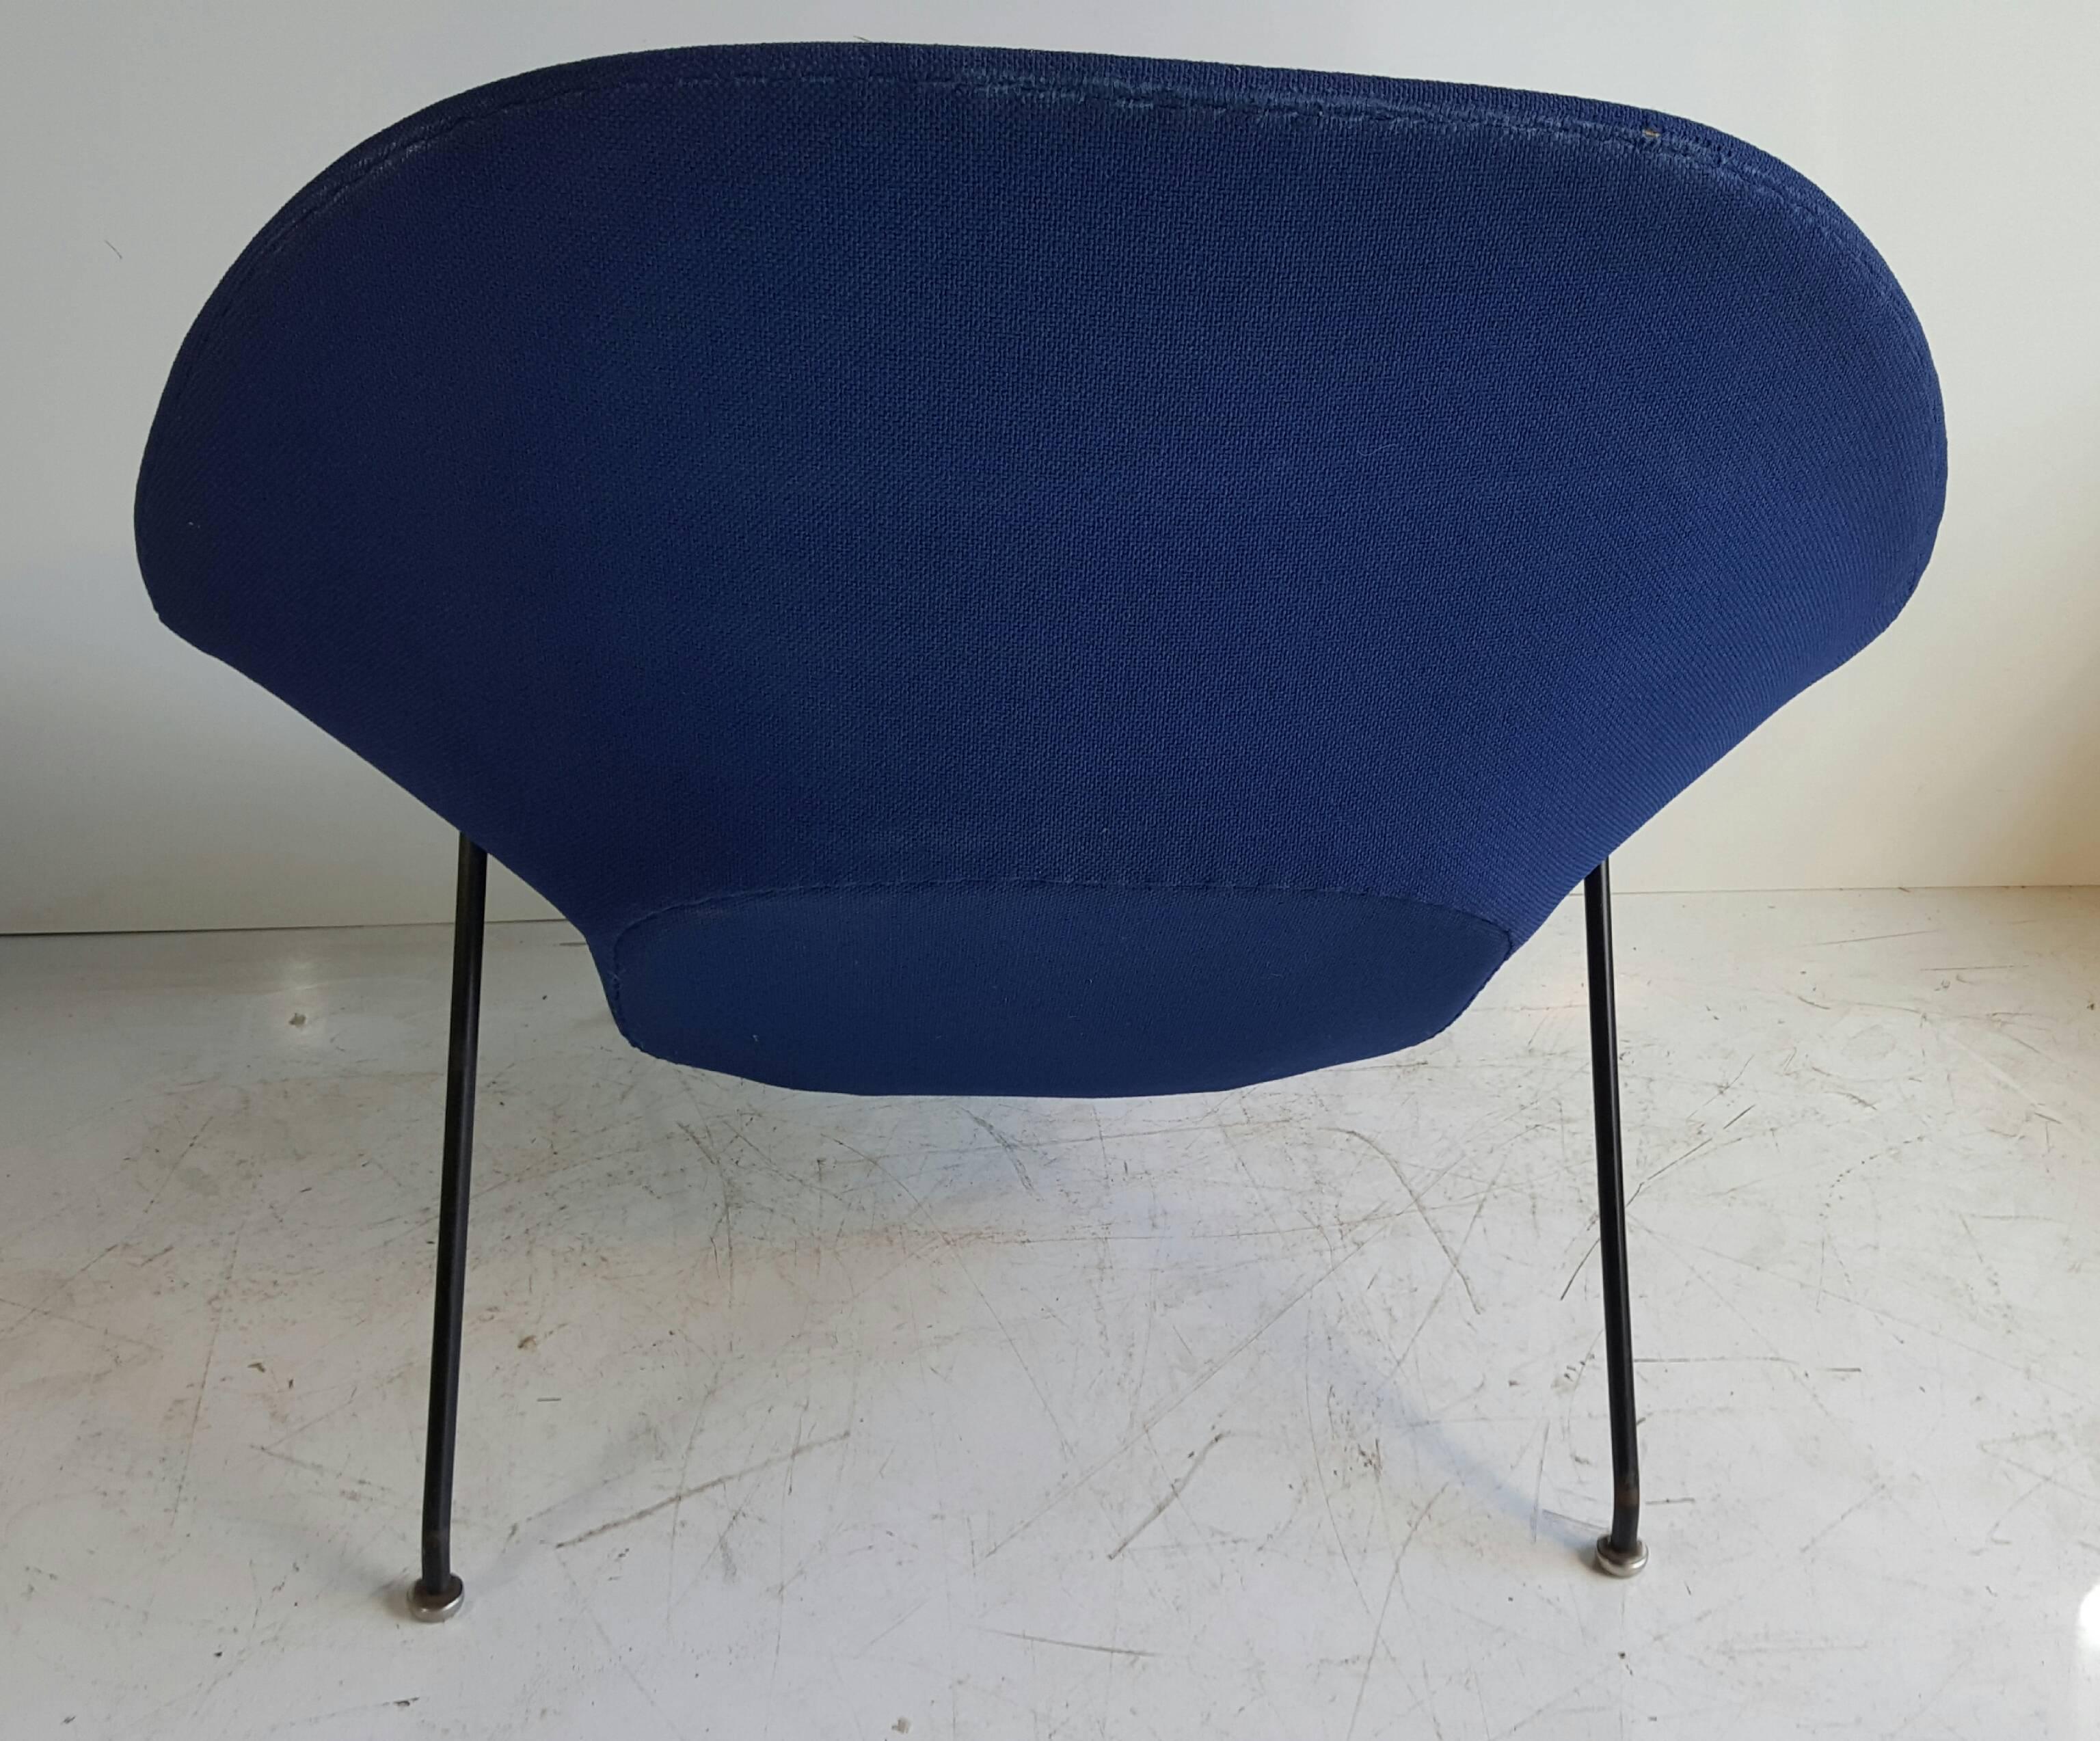 American Classic Mid-Century Modern Womb Chair by Eero Saarinen for Knoll